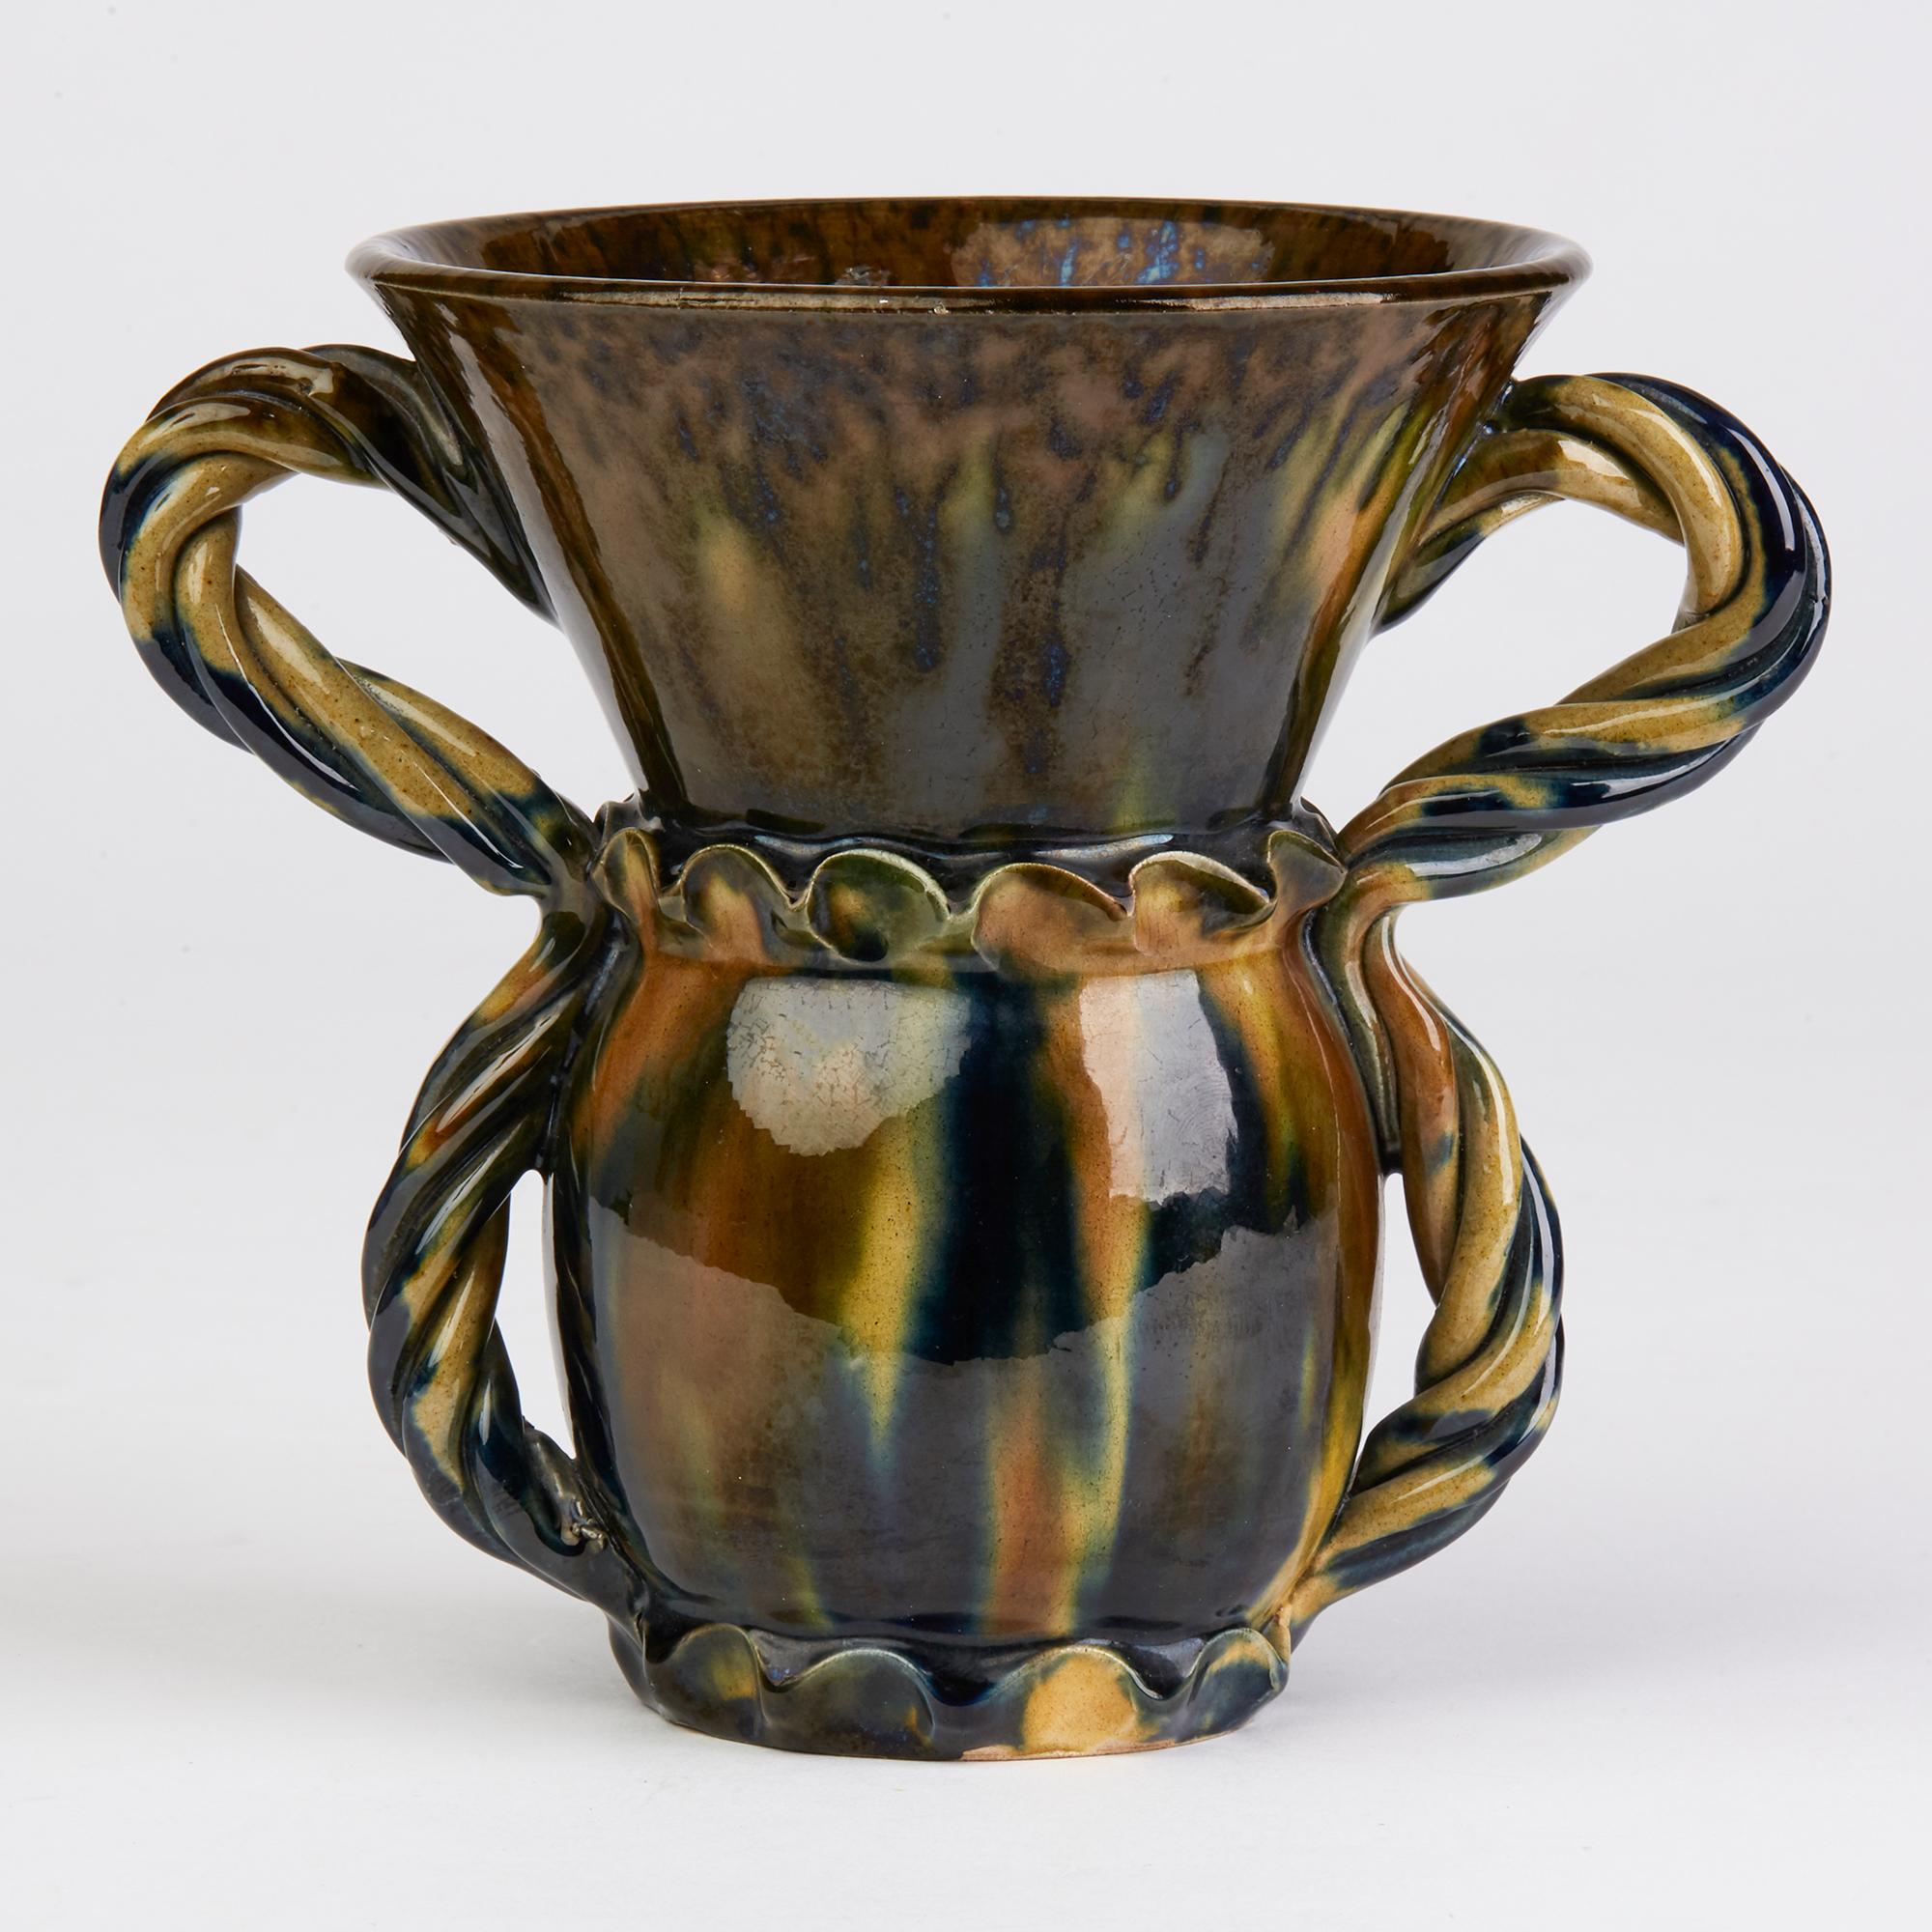 An unusual and exceptional antique French Vallauris twin handled art pottery vase attributed to Foucard-Jourdan decorated with blue, brown, yellow and green streaked glazes and applied with a double loop rope twist handle dating from the early 20th